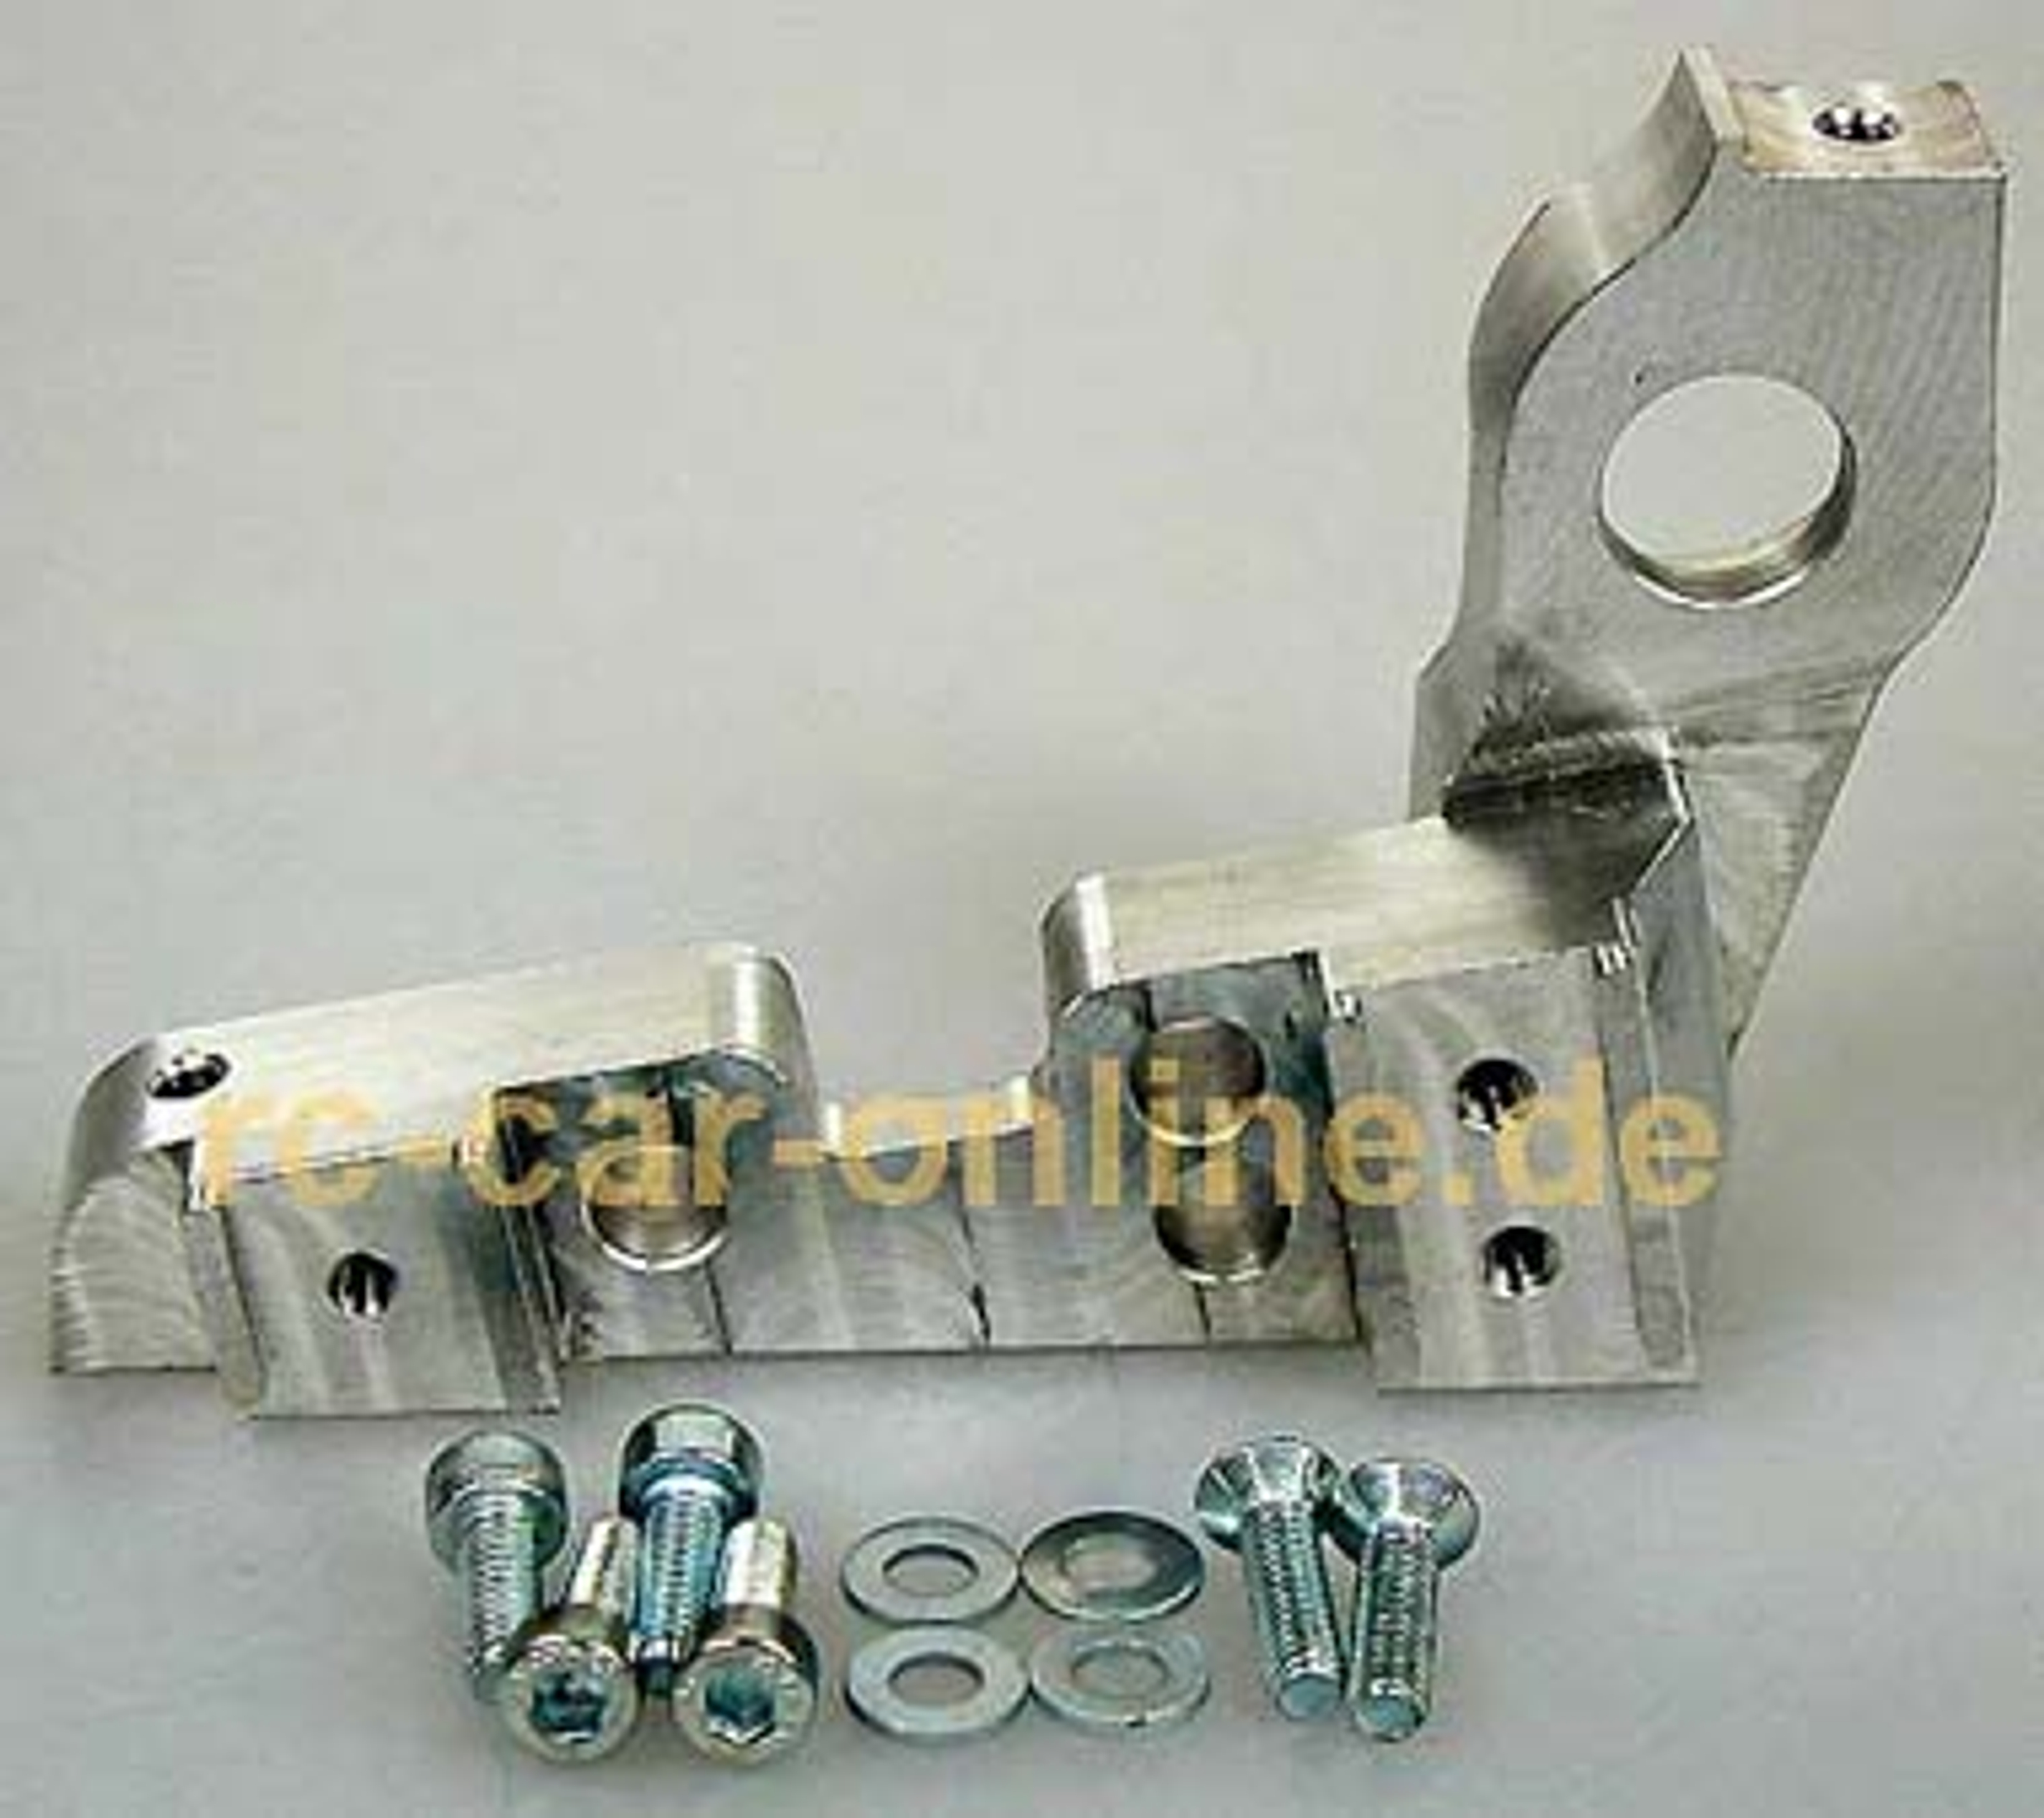 Alloy engine mount,  large for 2WD Carson / Smartech offroad cars, y0142 - 1pce.